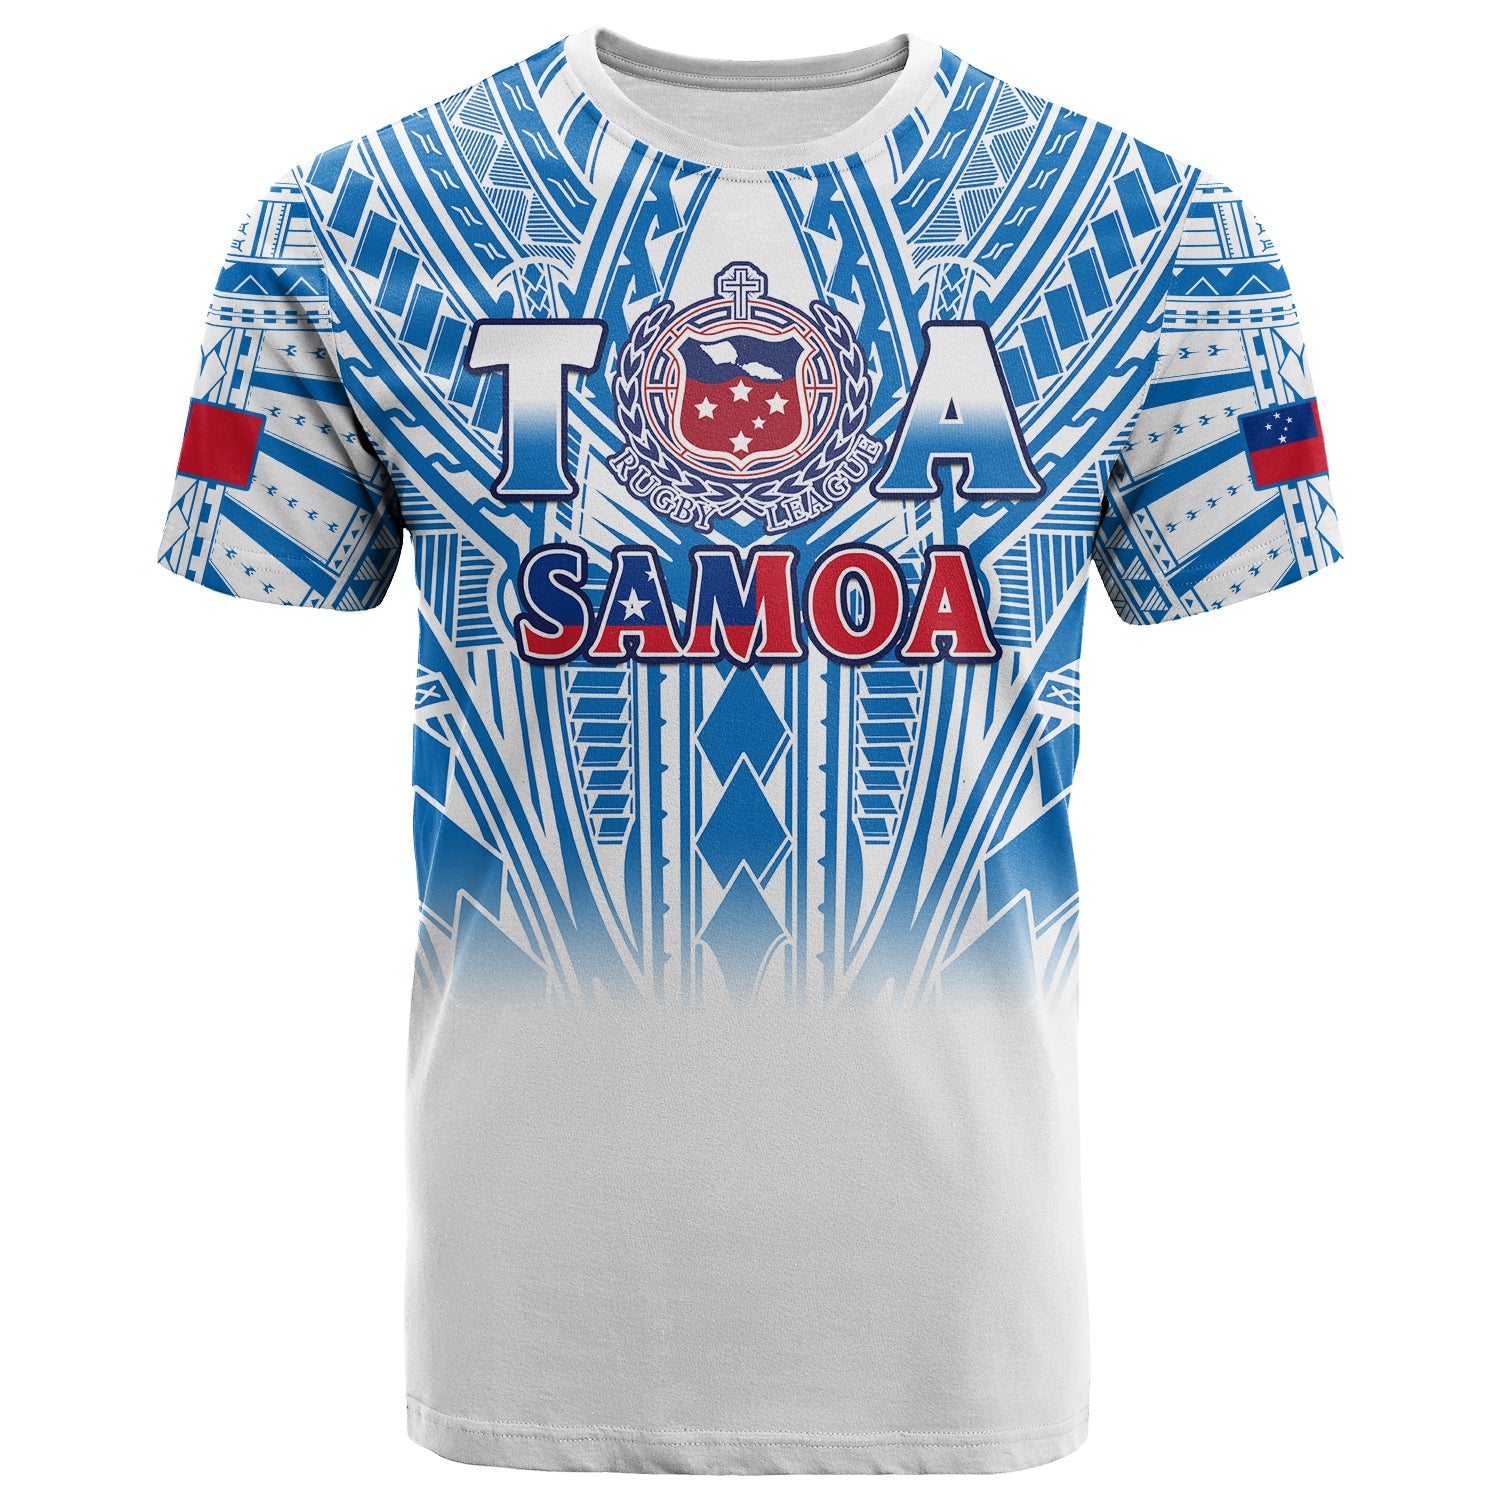 (Custom Text and Number) Samoa Rugby T Shirt Personalise Toa Samoa Polynesian Pacific White Version LT14 White - Polynesian Pride